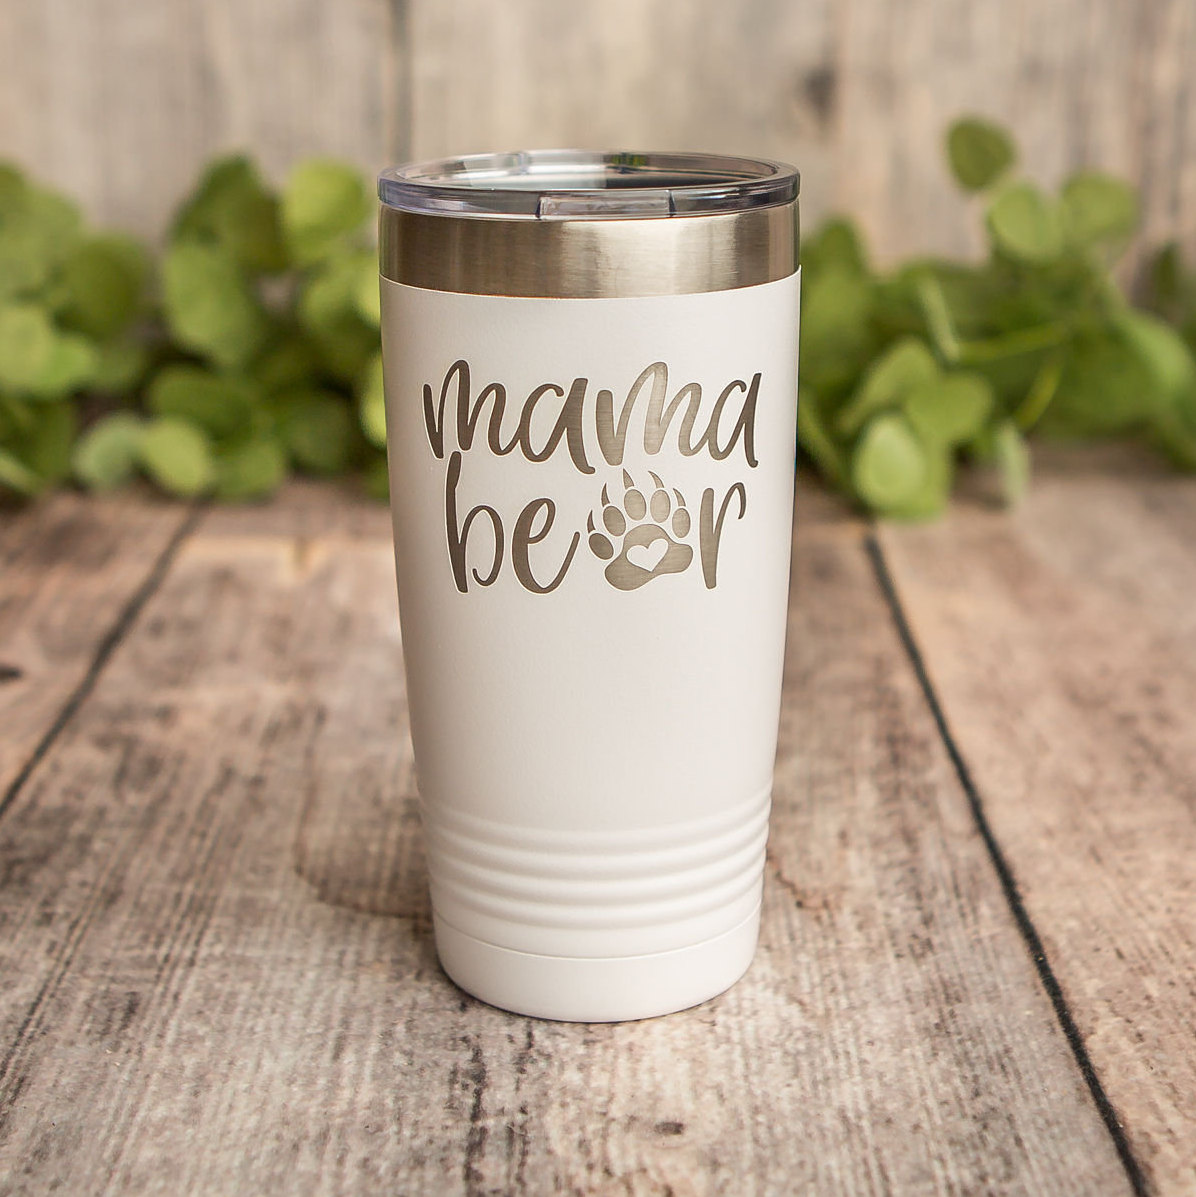 https://3cetching.com/wp-content/uploads/2020/09/mama-bear-engraved-stainless-steel-tumbler-yeti-style-cup-mama-bear-mug-5f5fab0b.jpg